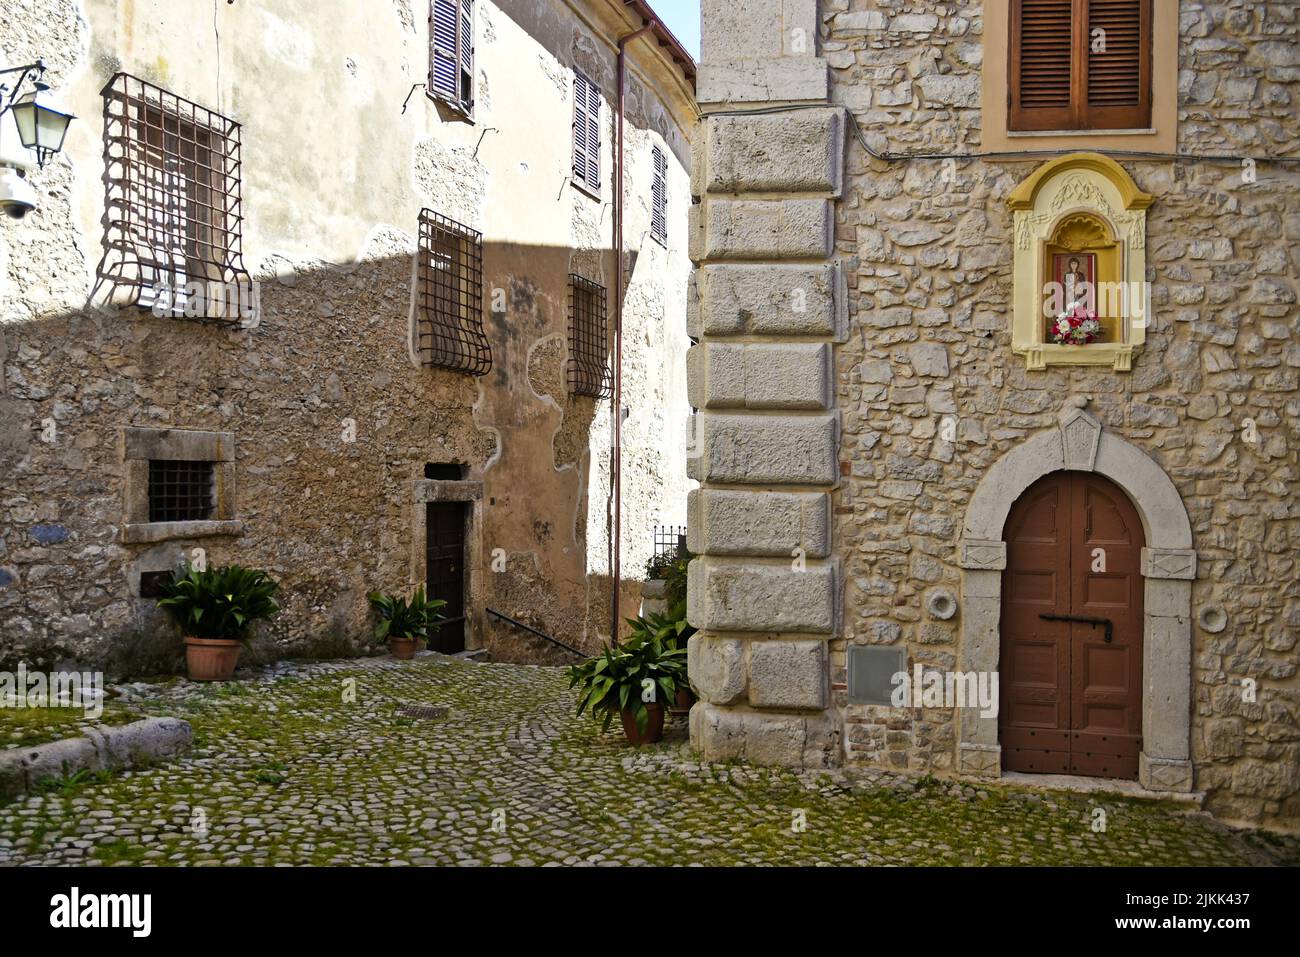 A cobblestone street between old medieval stone buildings in the daytime. Stock Photo